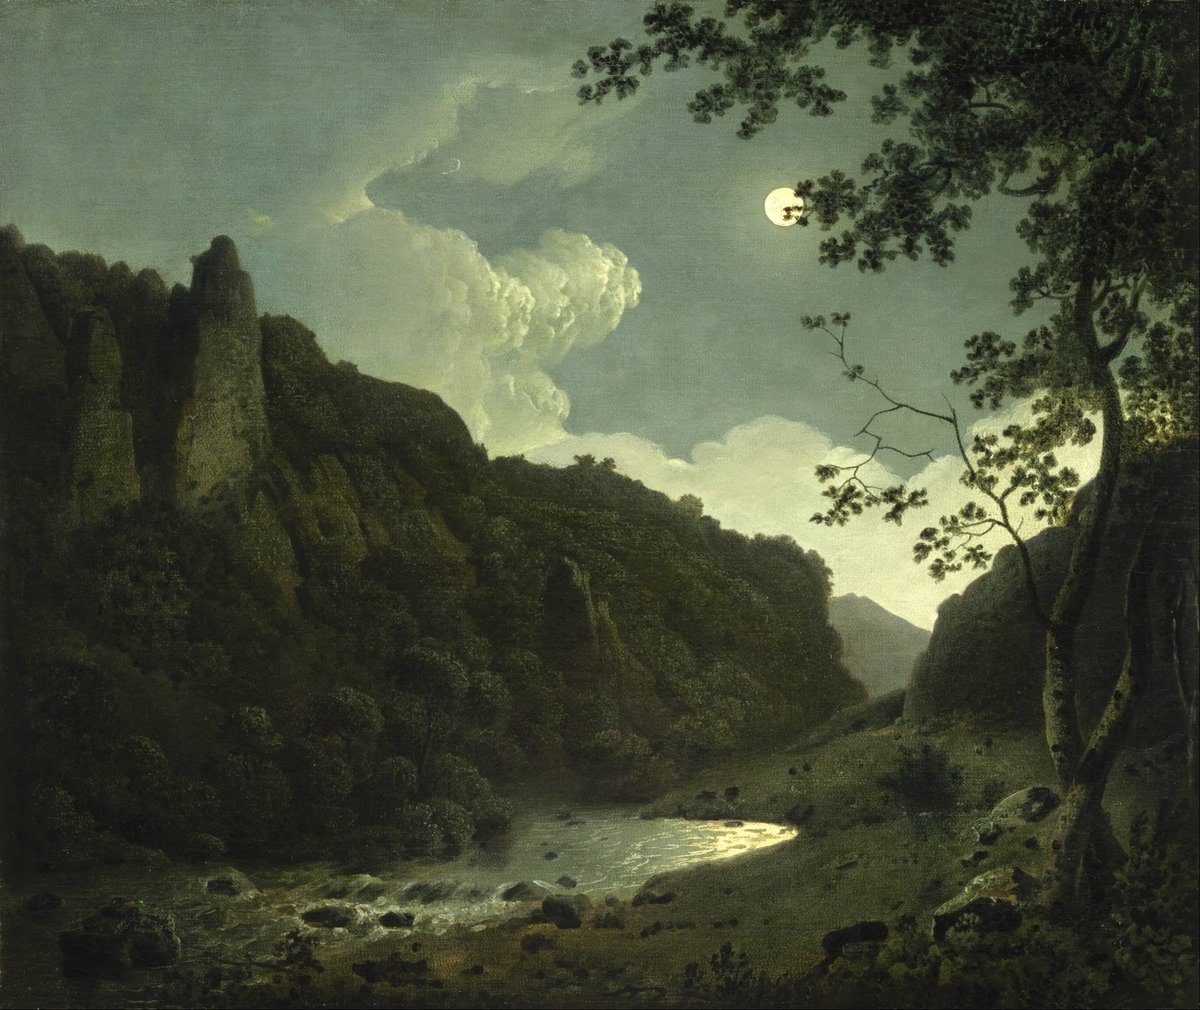 The moon’s beauty coming to you from the eighteenth century: ‘Dovedale by Moonlight’ by Joseph Wright of Derby, 1785